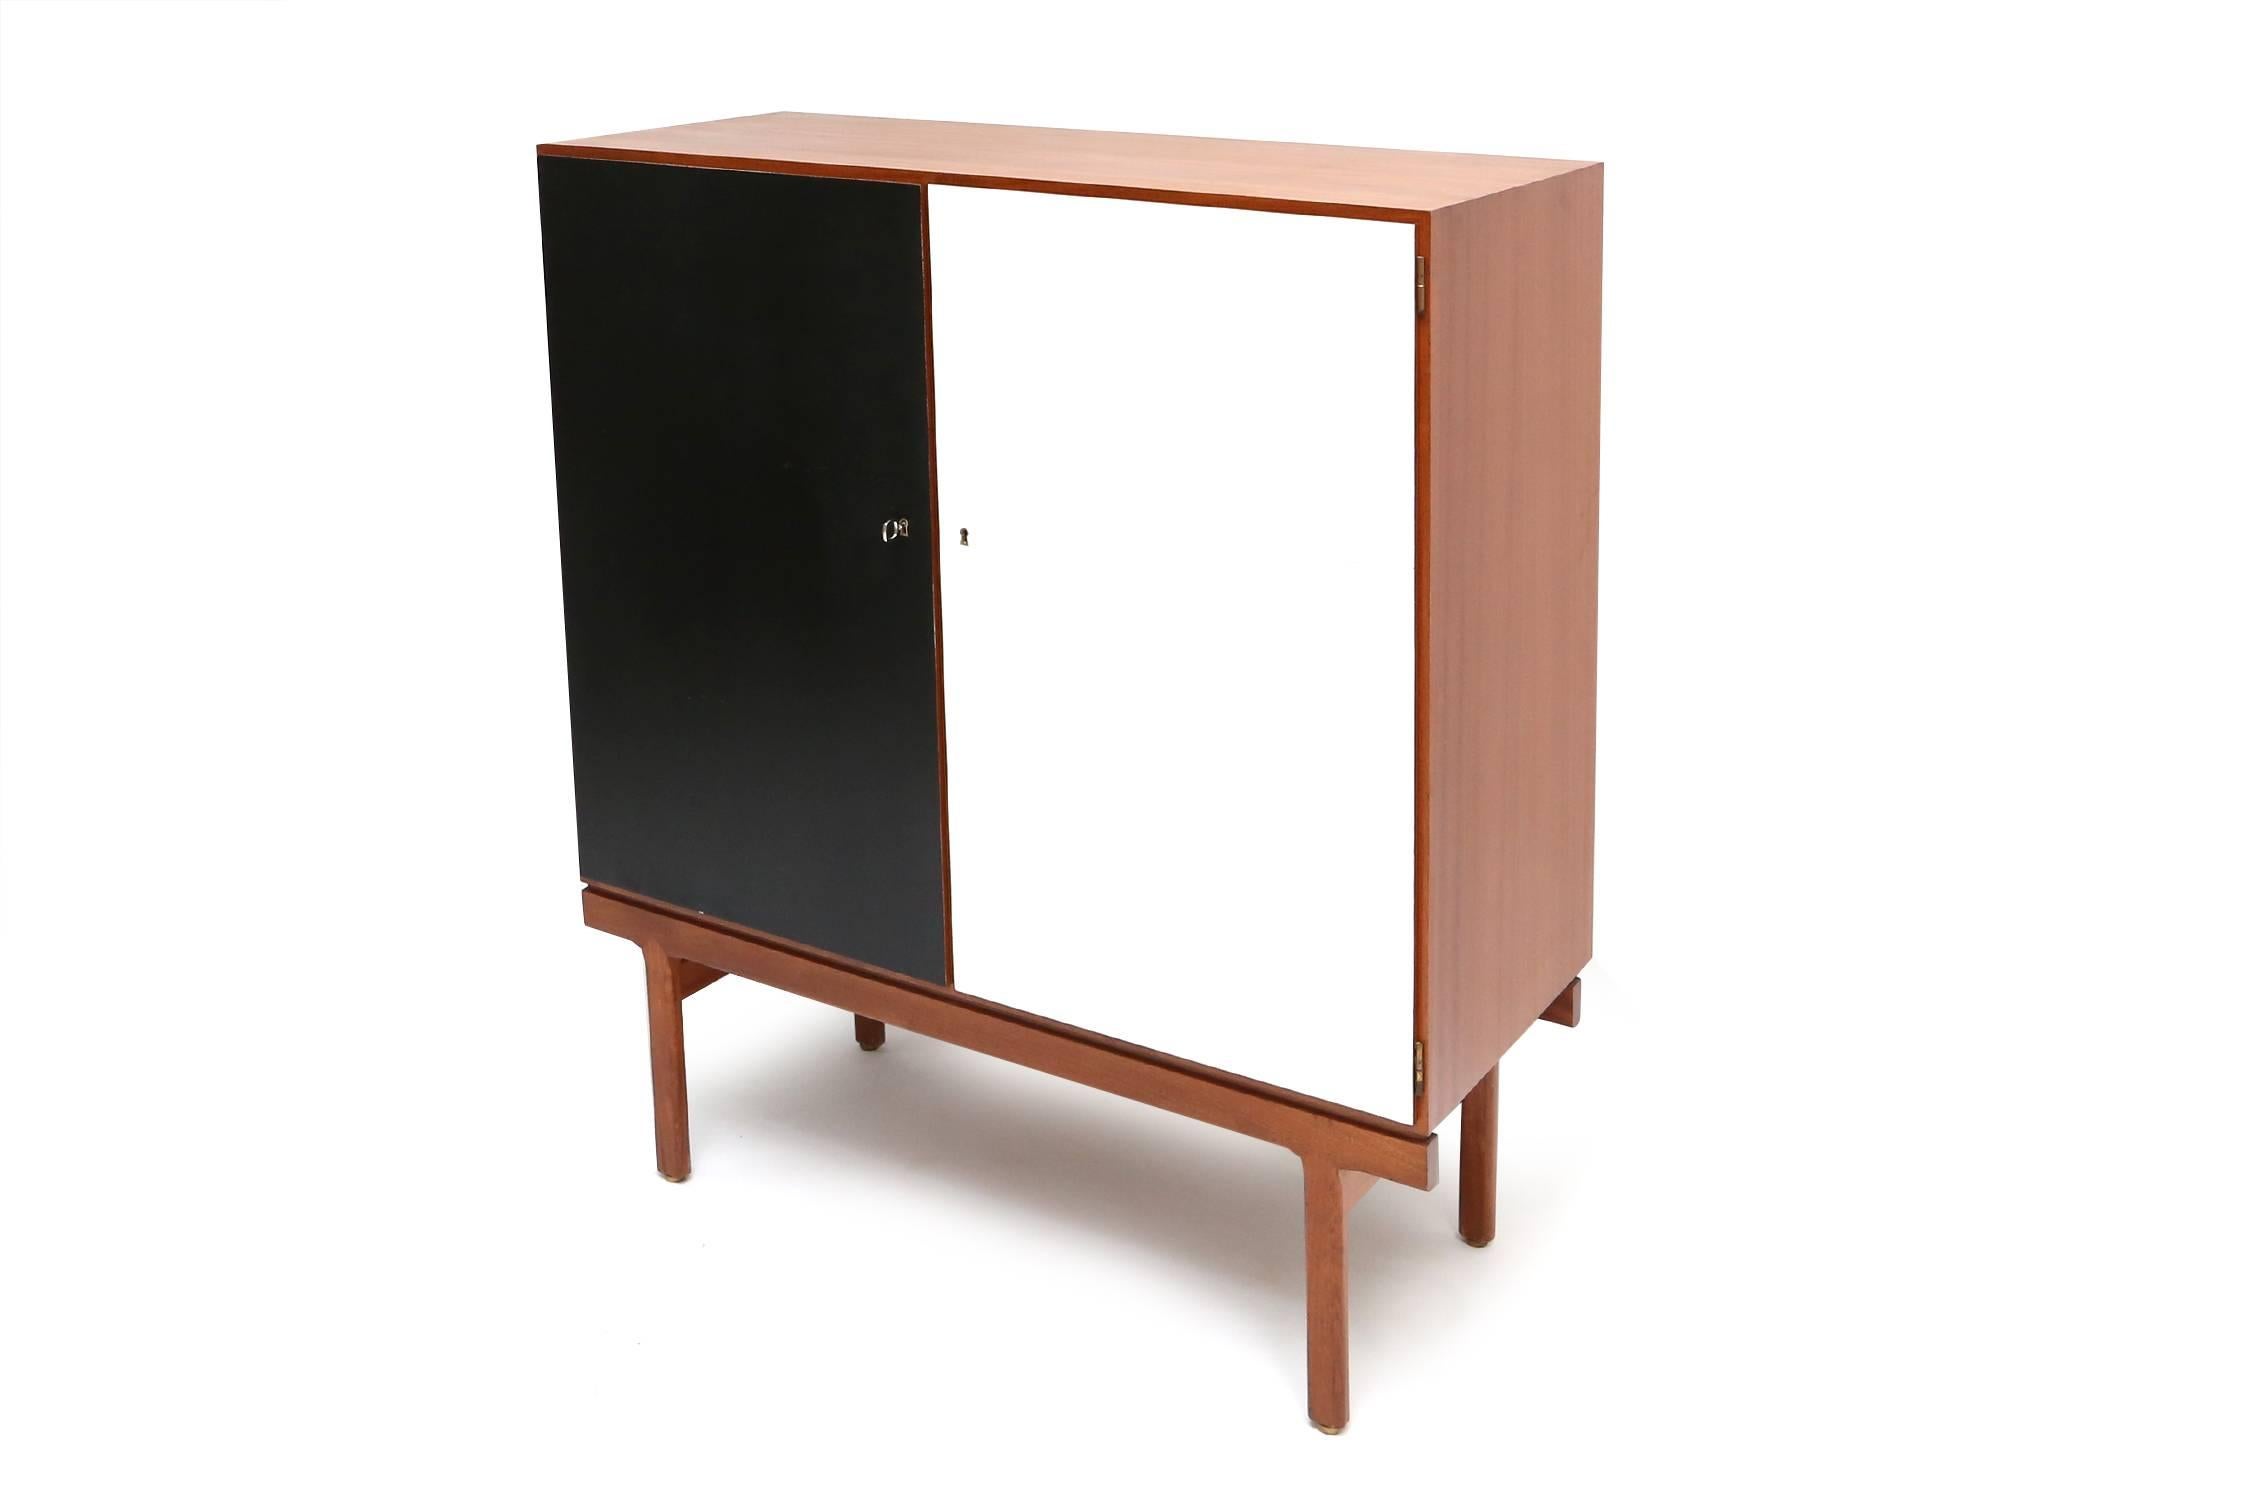 Black and white cabinet teak
by Van Den Berghe Pauvers Gent, Belgium, circa 1950s.
Drawers and shelves inside for multiple storage solutions.
Brass adjustable feet.
Measure: H 122 cm, W 106 cm, D 45 cm.